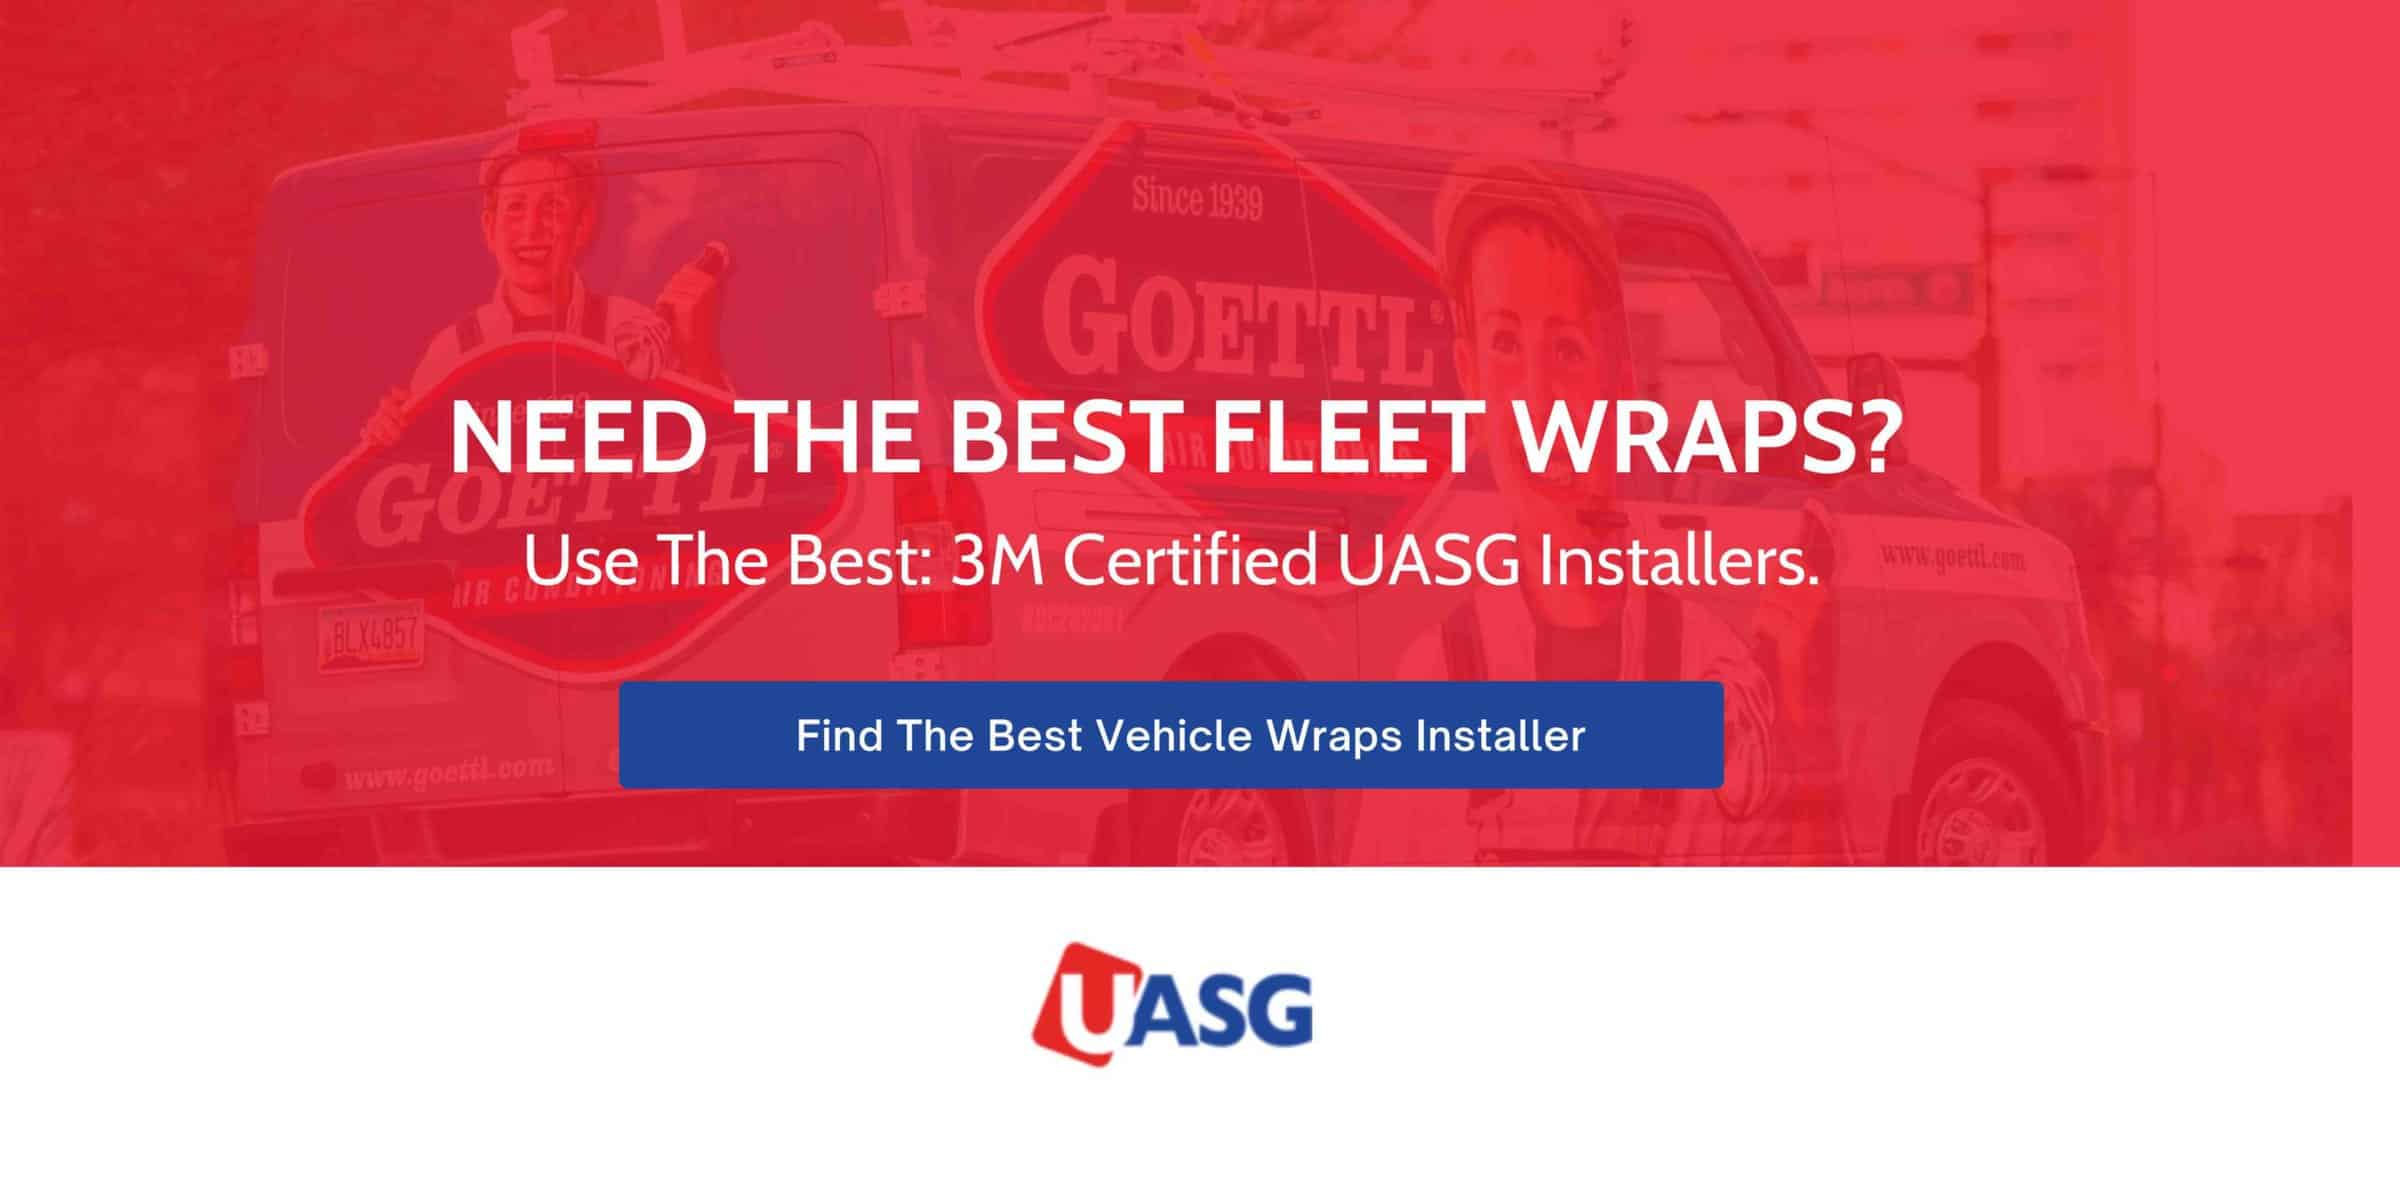 Image with HVAC van in background and text promoting UASG vehicle wraps installers.